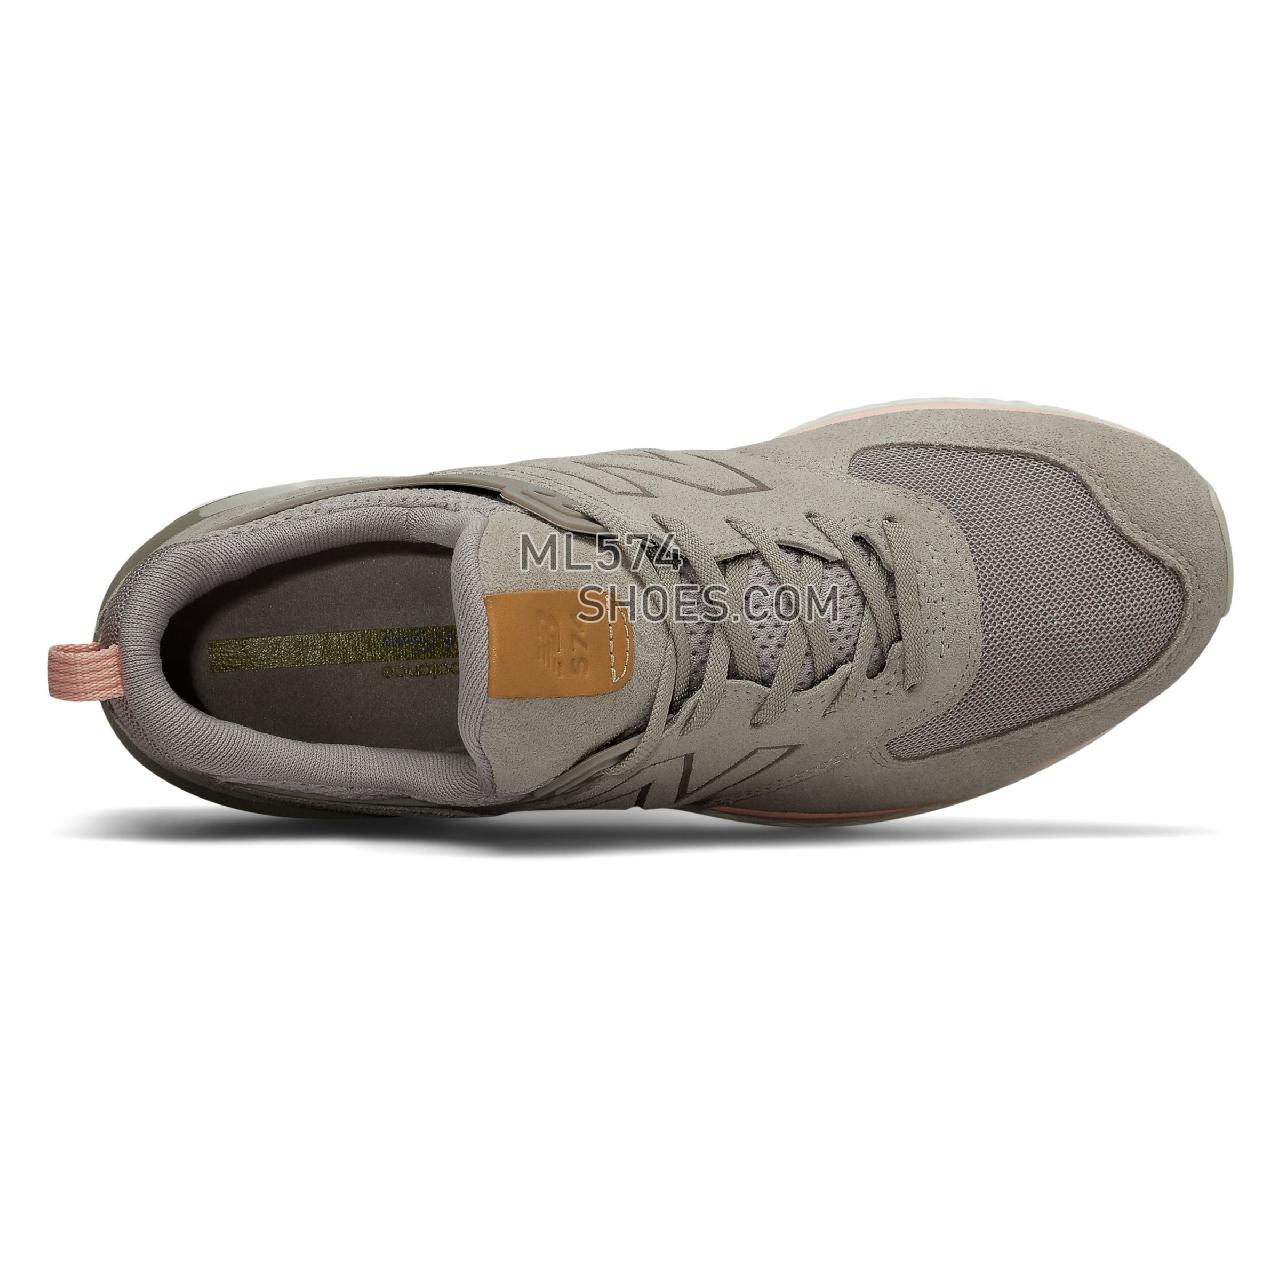 New Balance 574 Sport - Women's 574 - Classic Flat White with Himalayan Pink - WS574PMC